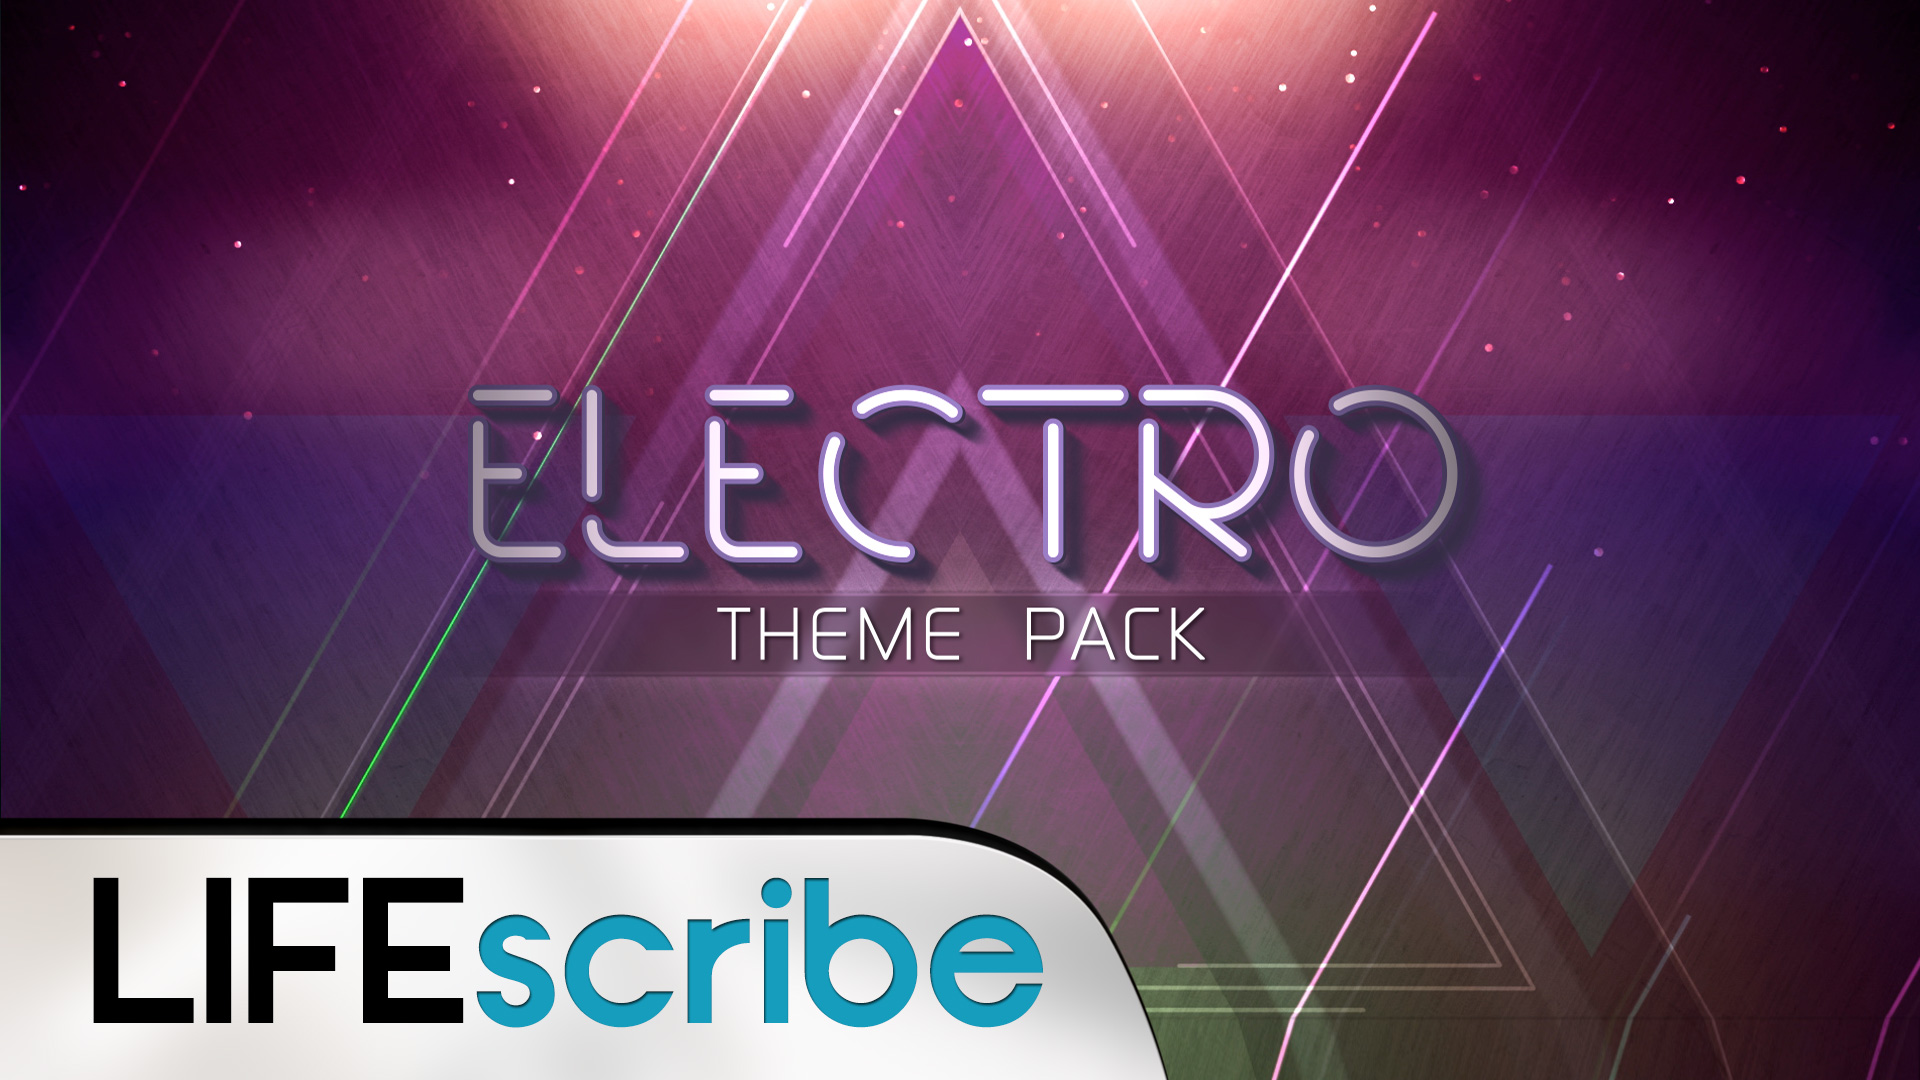 Electro Theme Pack